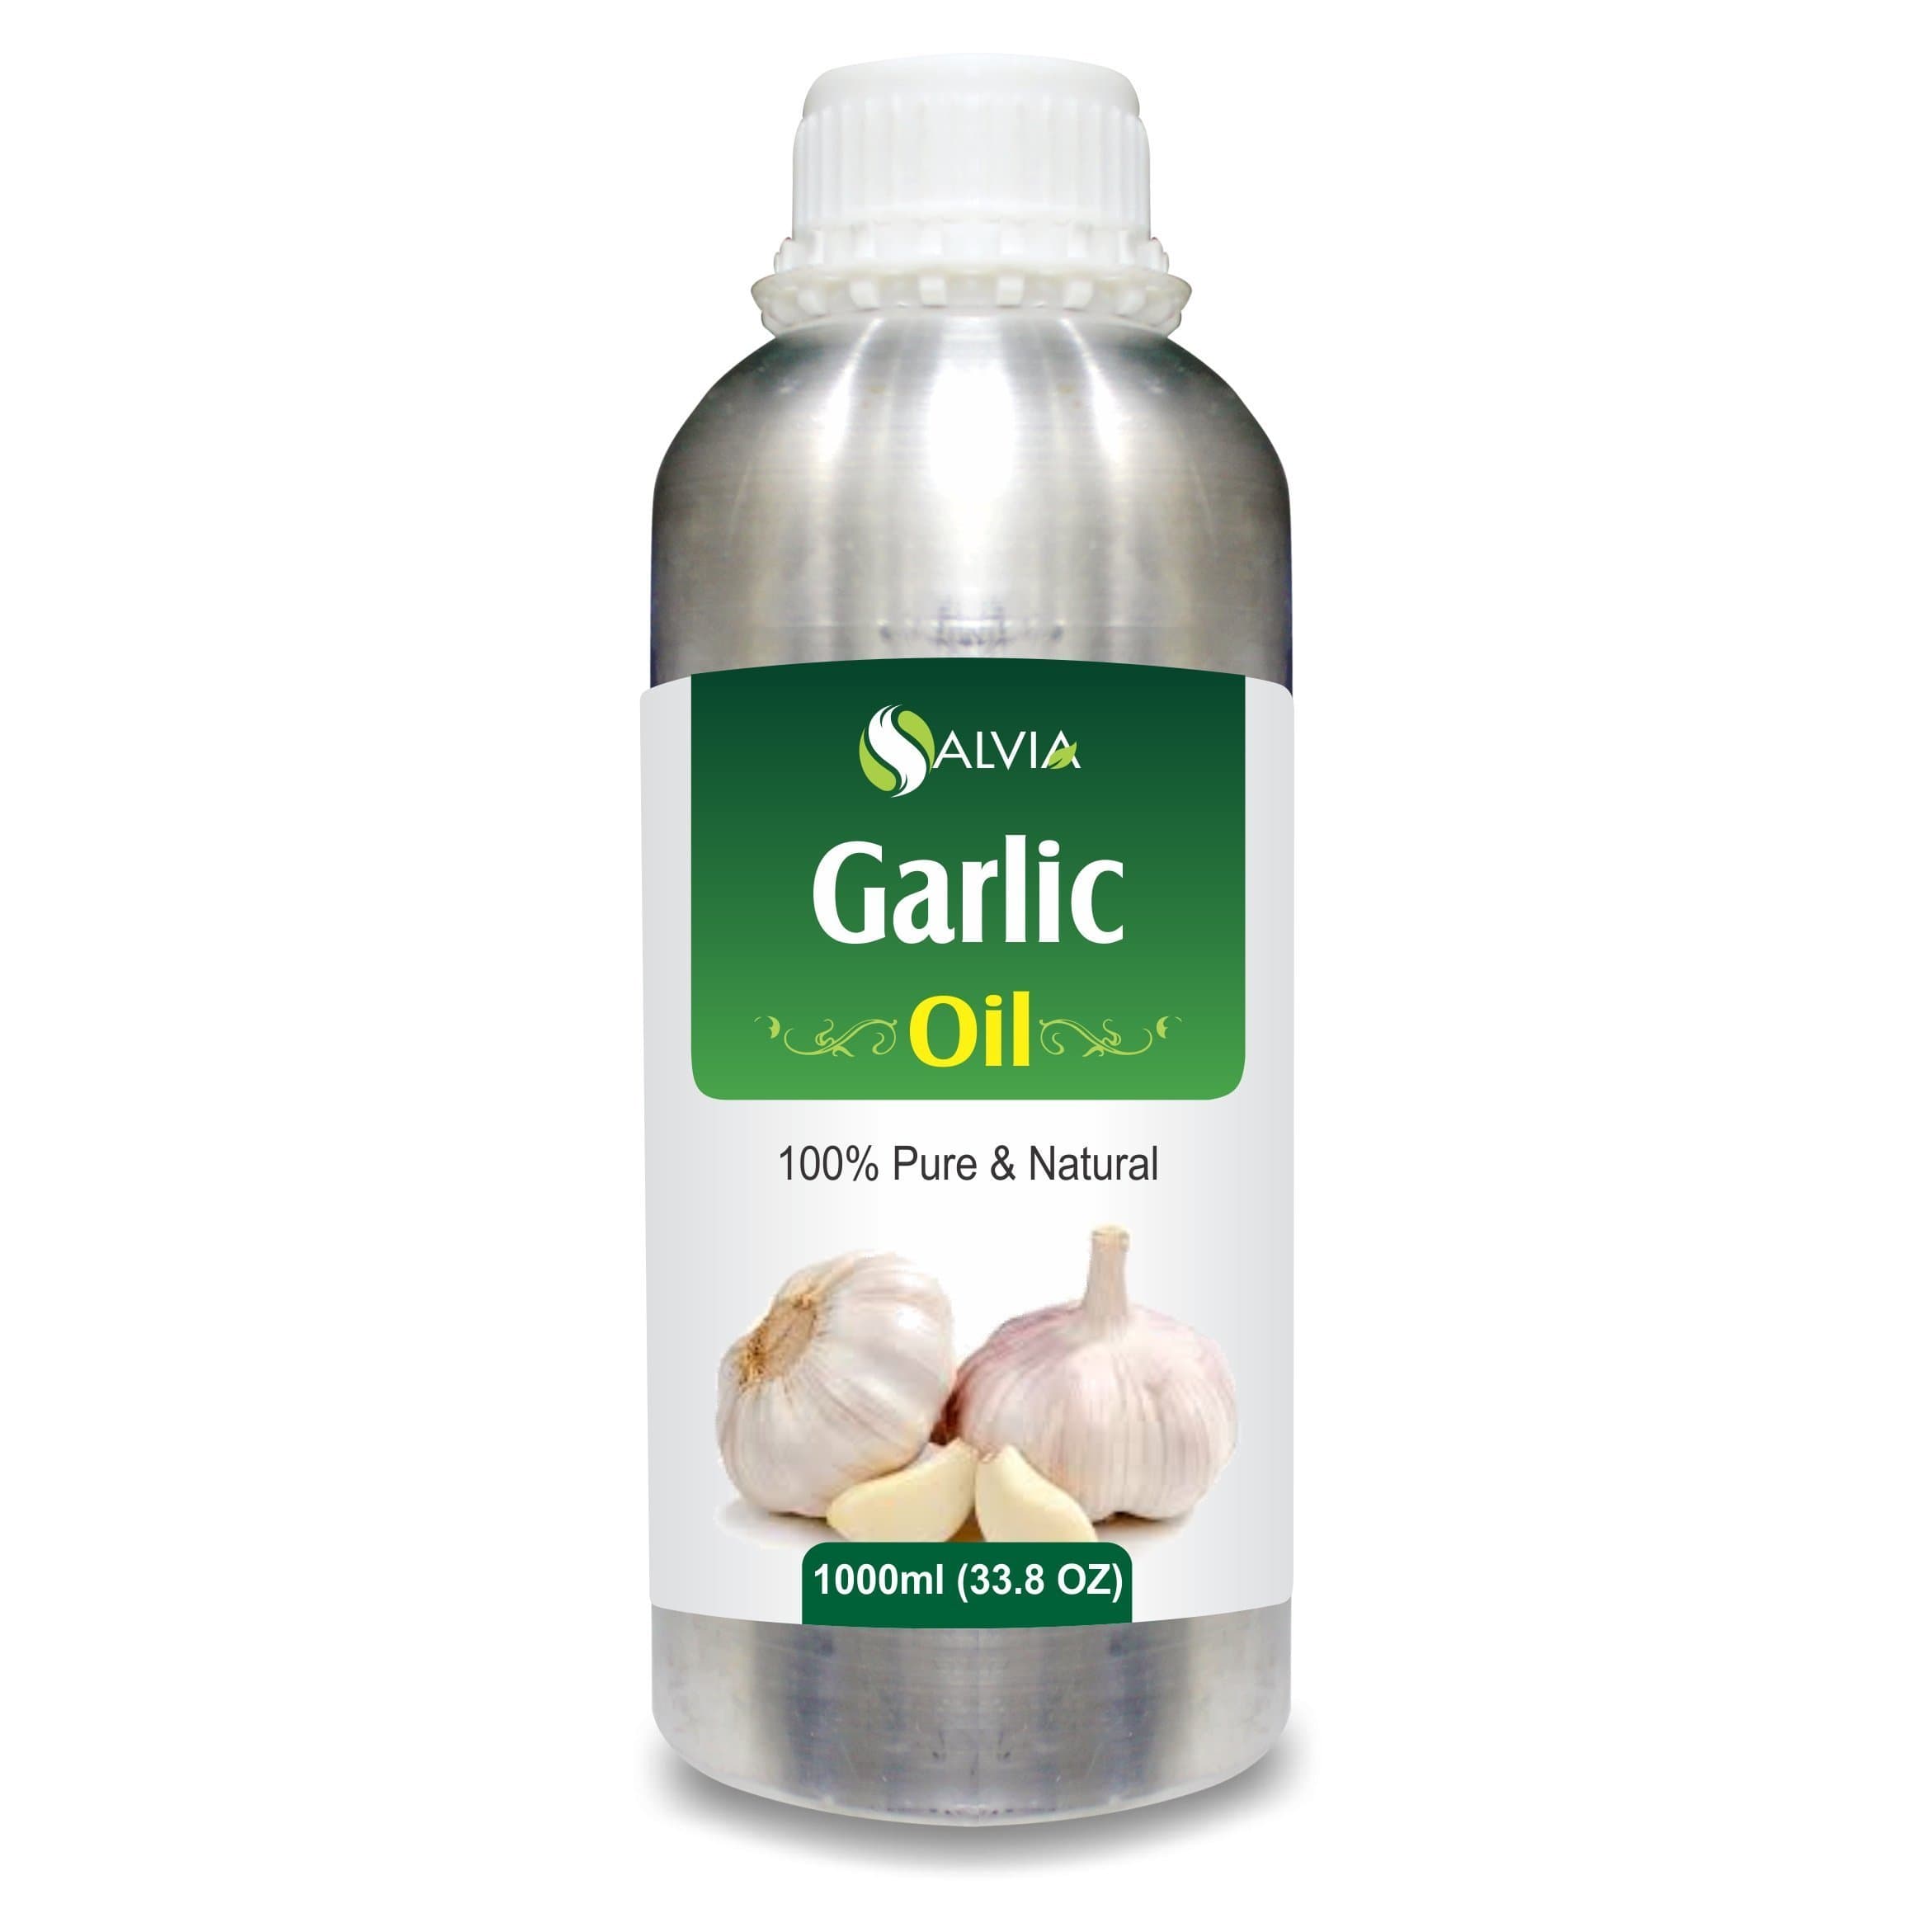 garlic oil benefits for face